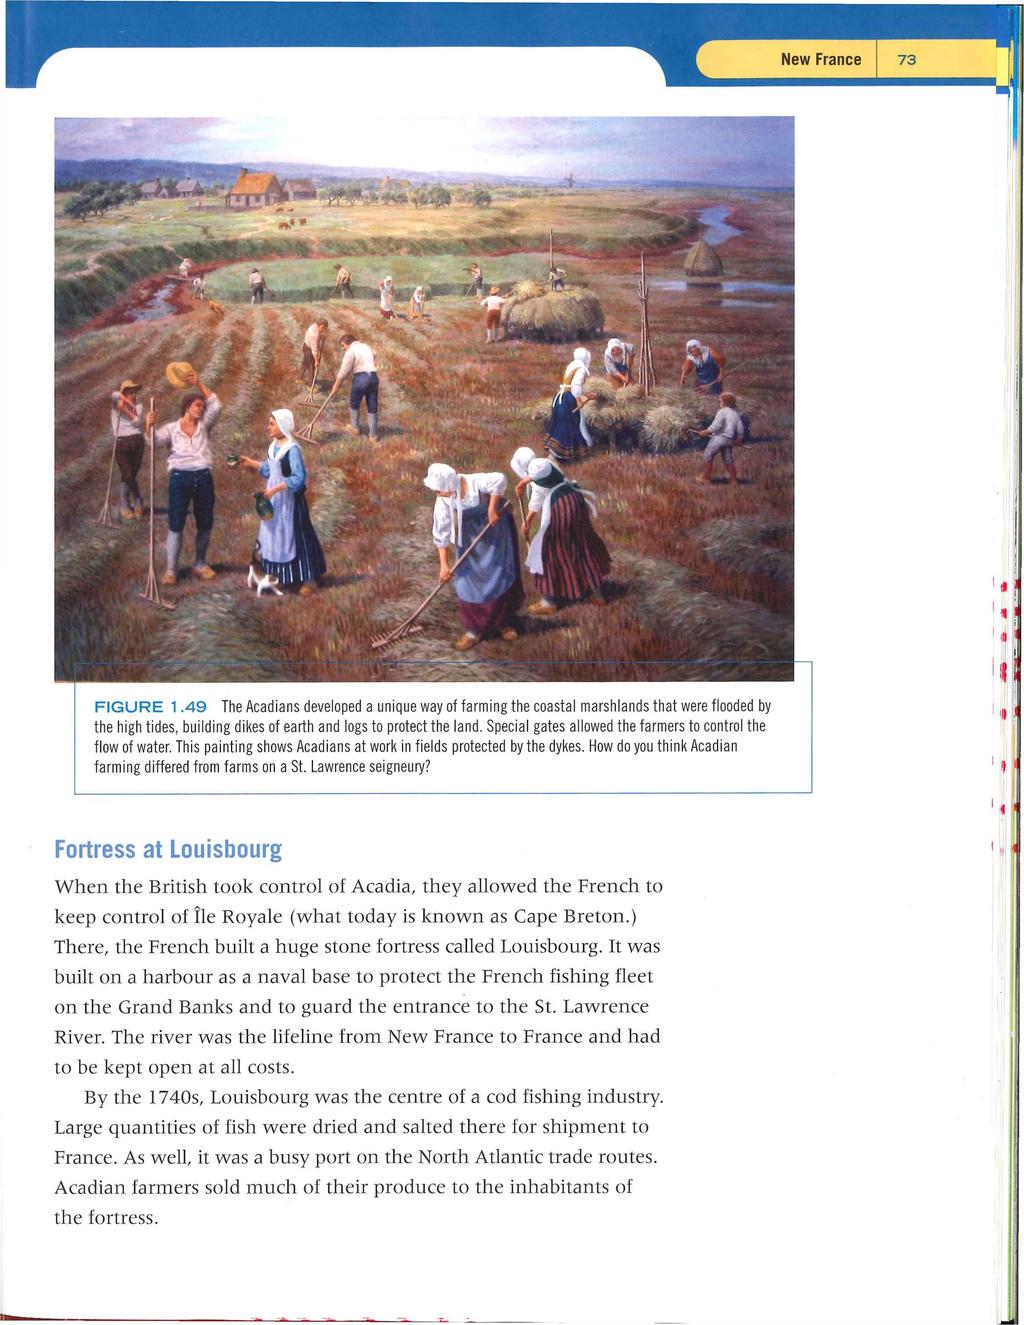 FIGURE 1.49 The Acadians developed a unique way of farming the coastal marshlands that were flooded by :l) the high tides, building dikes of earth and logs to protect the land.